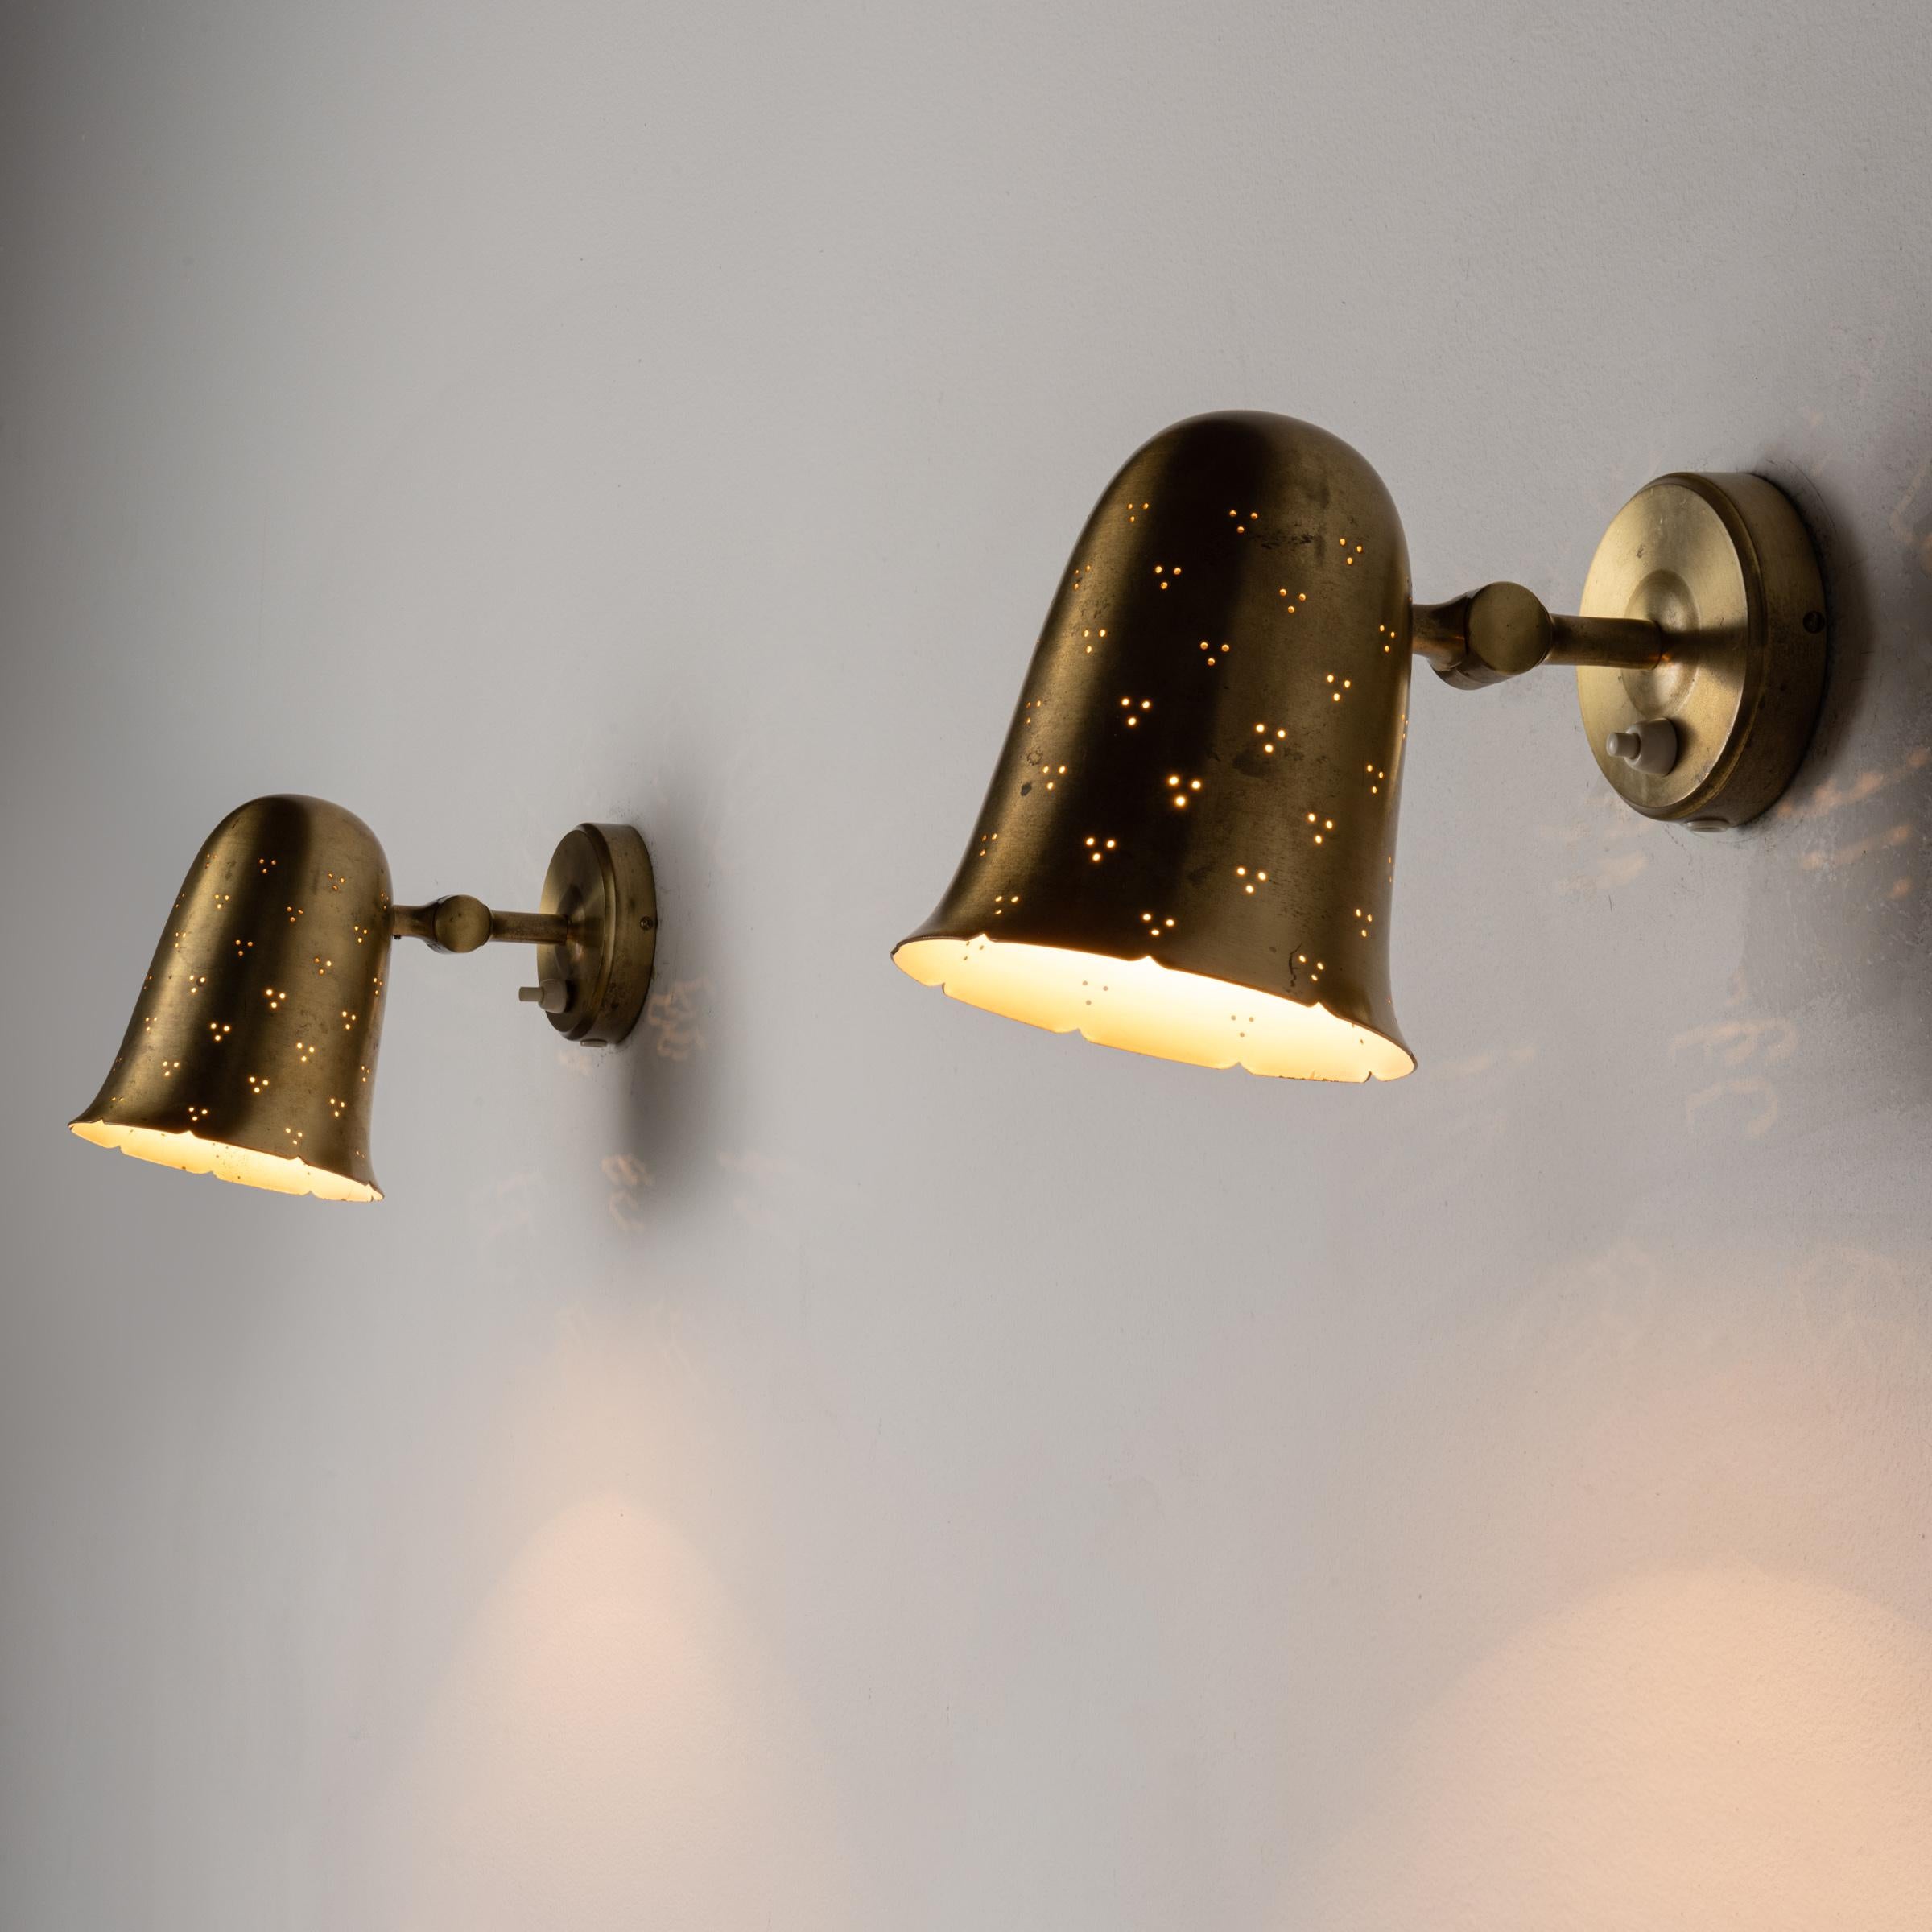 Pair of Sconces by Boréns Borås. Manufactured in Sweden, circa 1950's. Brass shades articulate to various positions. Rewired for U.S. standards. We recommend one E27 75w maximum bulb per fixture. Bulbs not provided.